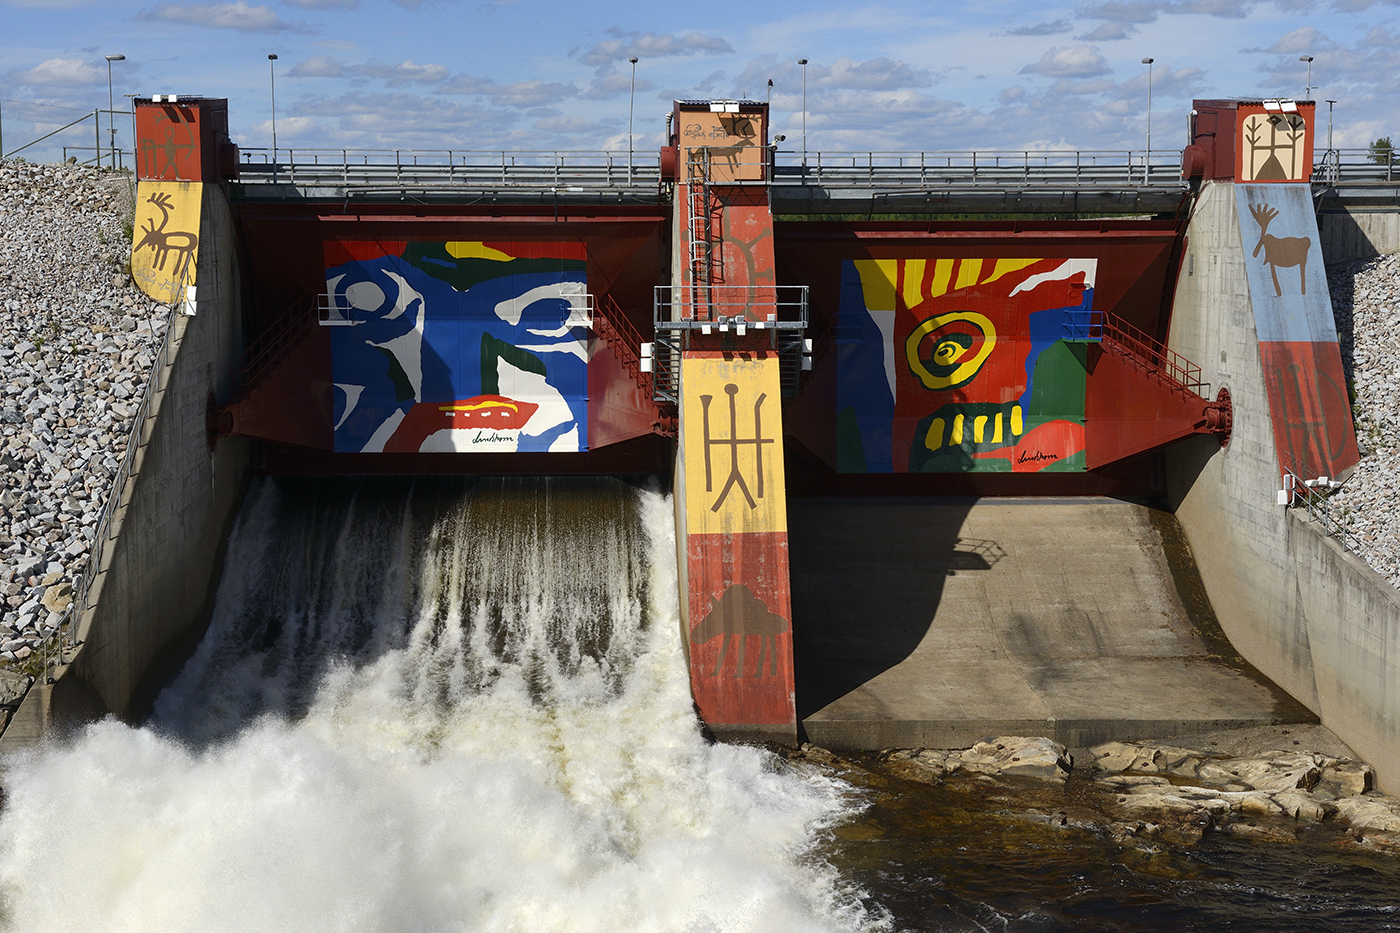 Dam Removal Europe will work to restore European rivers by removing old and obsolete dams and weirs.